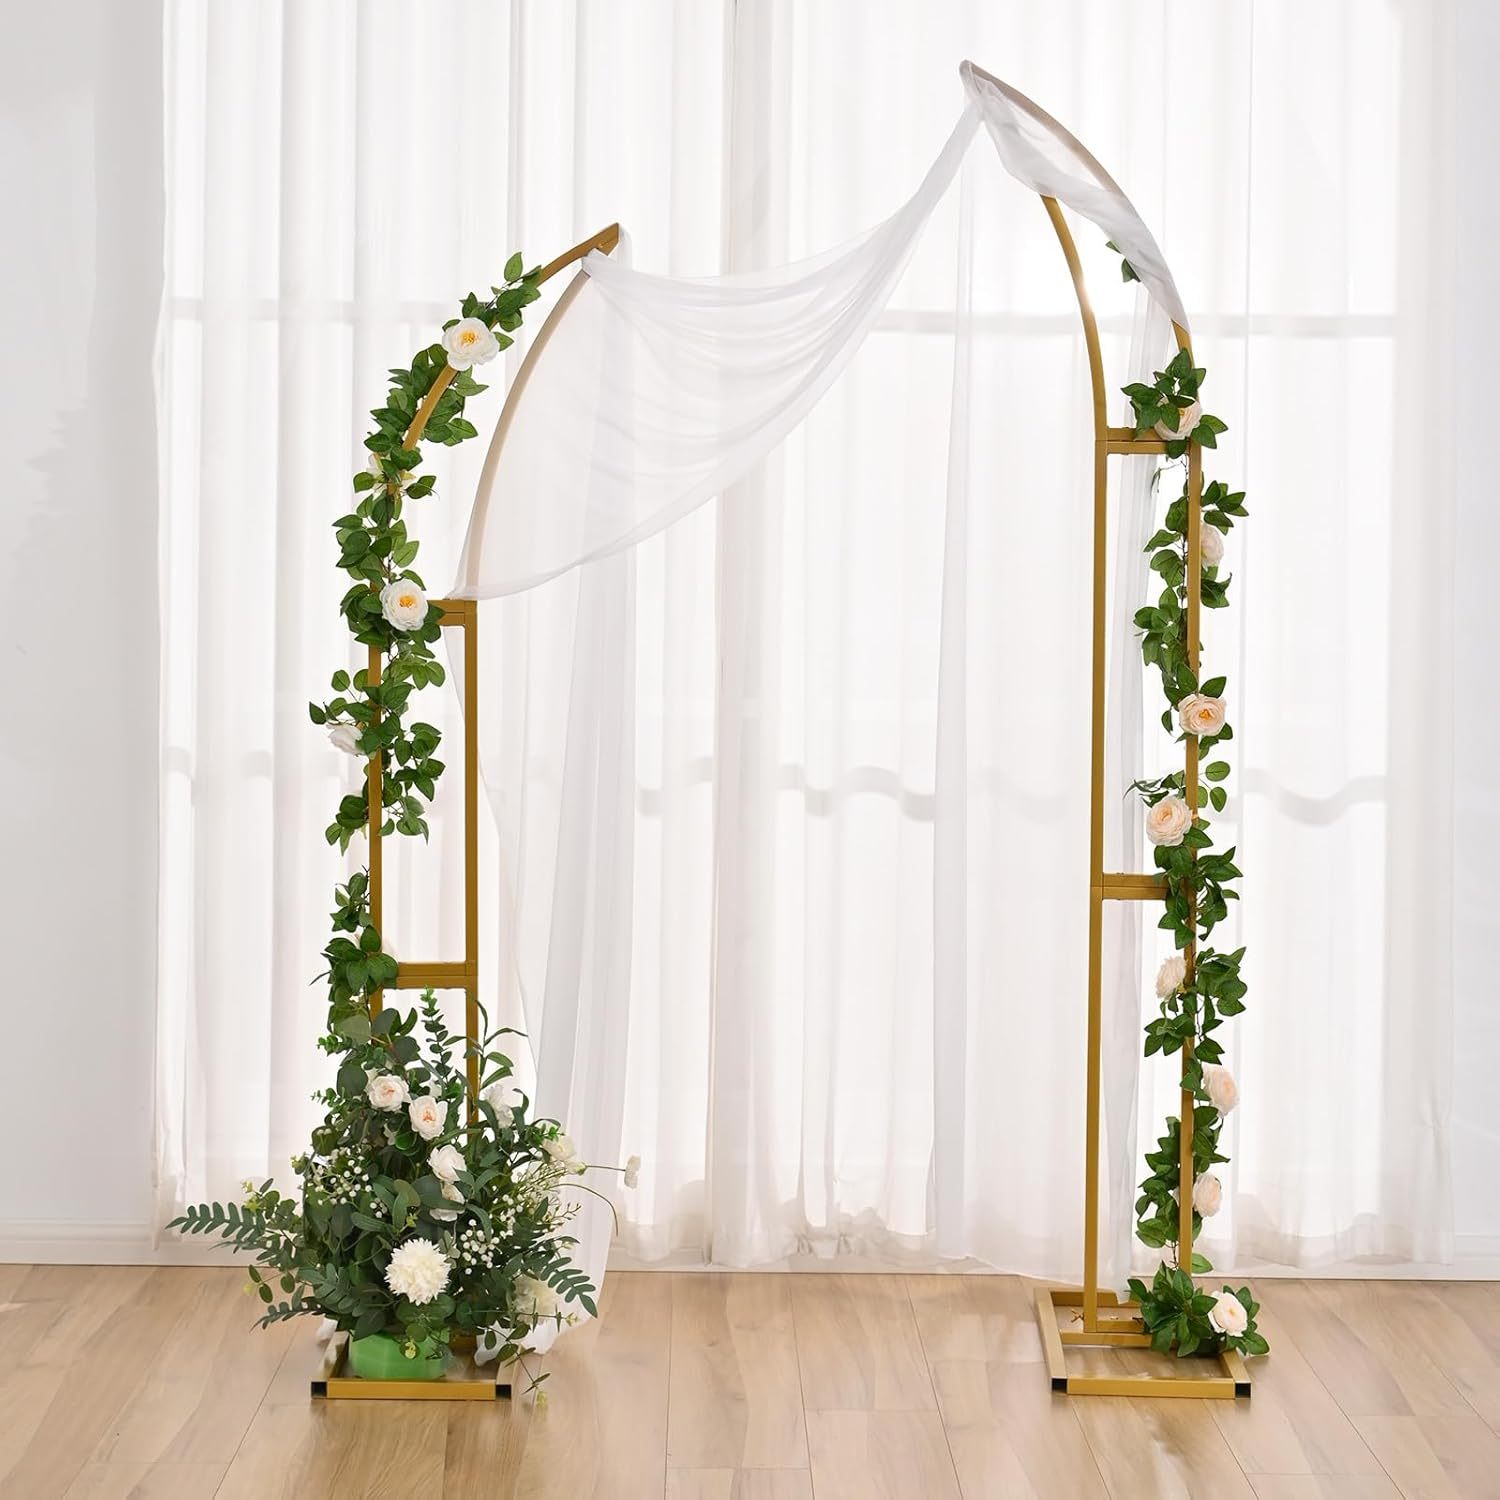 

2pcs Curved Wedding Arch Backdrop Stand, Balloon Arch For Ceremony Birthday Party Bride Shower, Metal Half Moon Wedding Arch (5.9ft, 6.9ft) Christmas Gift